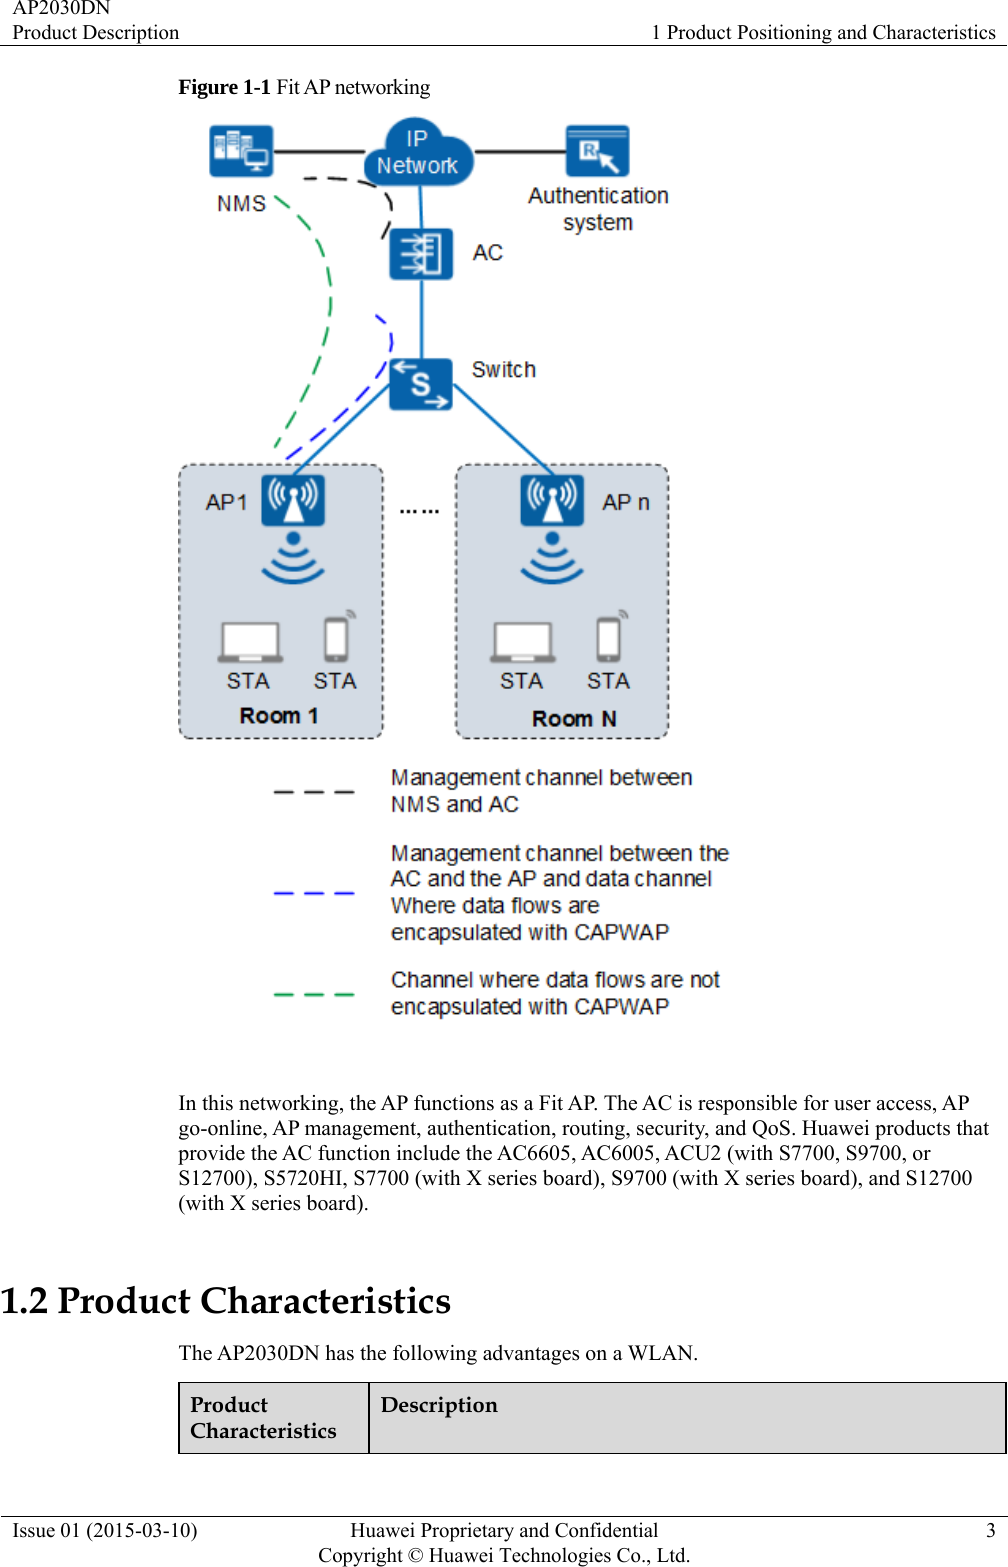 AP2030DN Product Description  1 Product Positioning and Characteristics Issue 01 (2015-03-10)  Huawei Proprietary and Confidential         Copyright © Huawei Technologies Co., Ltd.3 Figure 1-1 Fit AP networking   In this networking, the AP functions as a Fit AP. The AC is responsible for user access, AP go-online, AP management, authentication, routing, security, and QoS. Huawei products that provide the AC function include the AC6605, AC6005, ACU2 (with S7700, S9700, or S12700), S5720HI, S7700 (with X series board), S9700 (with X series board), and S12700 (with X series board). 1.2 Product Characteristics The AP2030DN has the following advantages on a WLAN. Product Characteristics Description 